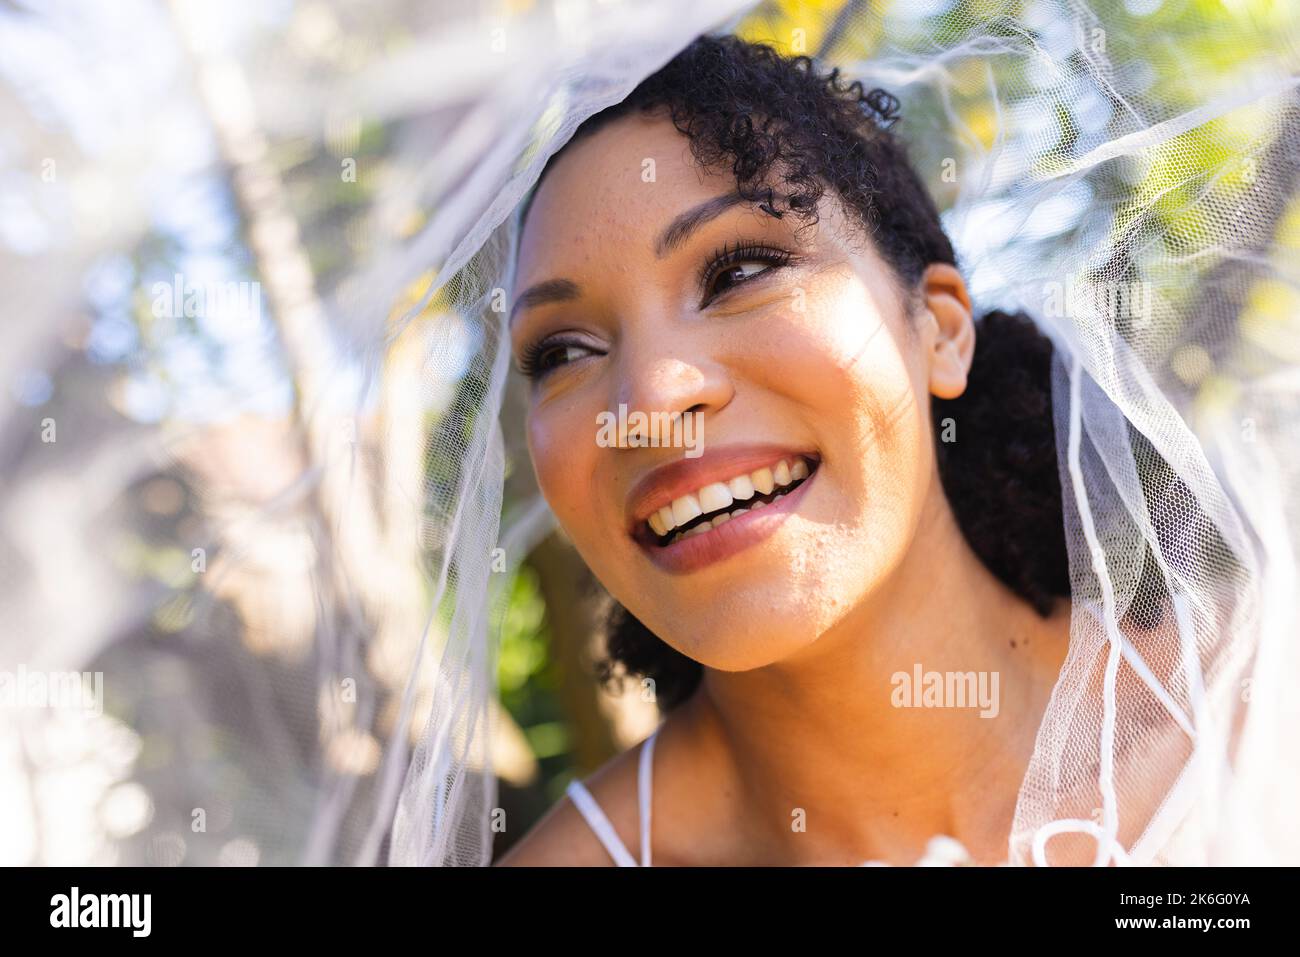 Happy african american woman wearing wedding dress and veil during wedding day Stock Photo